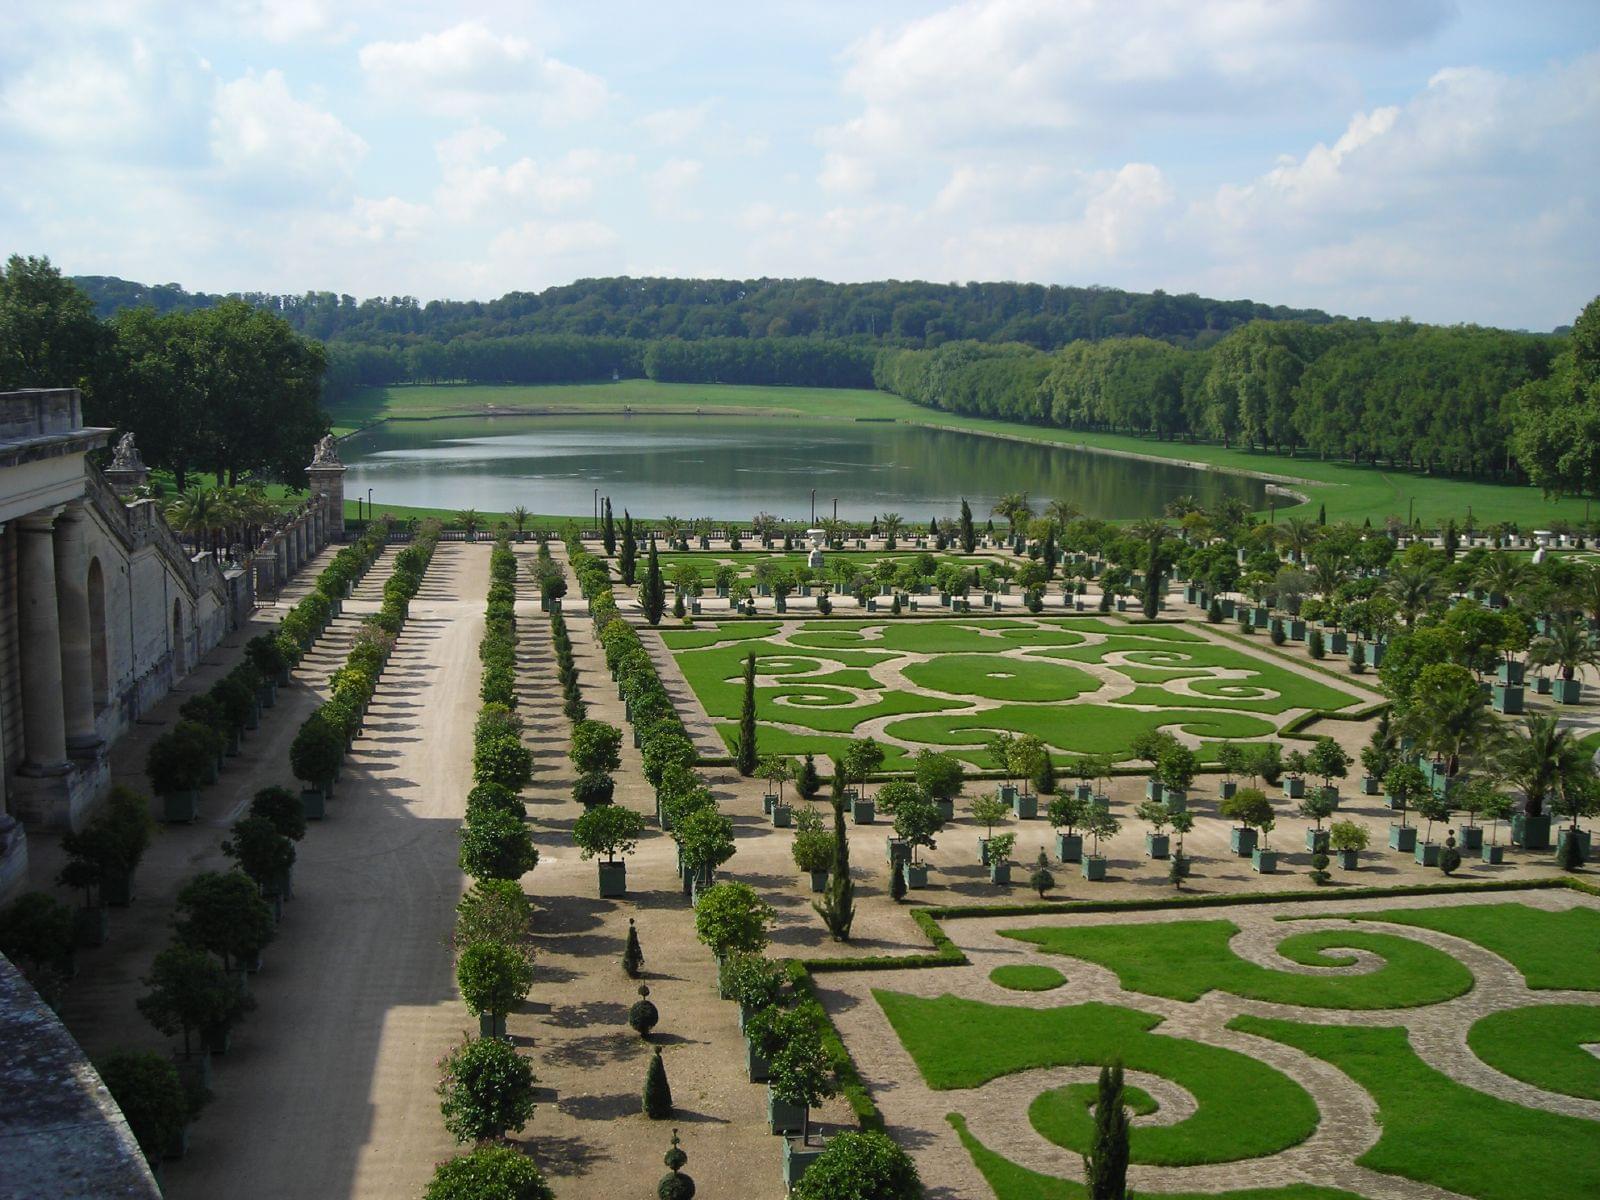 1581193229 823 We advise you to enjoy visiting the beauty of the - We advise you to enjoy visiting the beauty of the Palace of Versailles